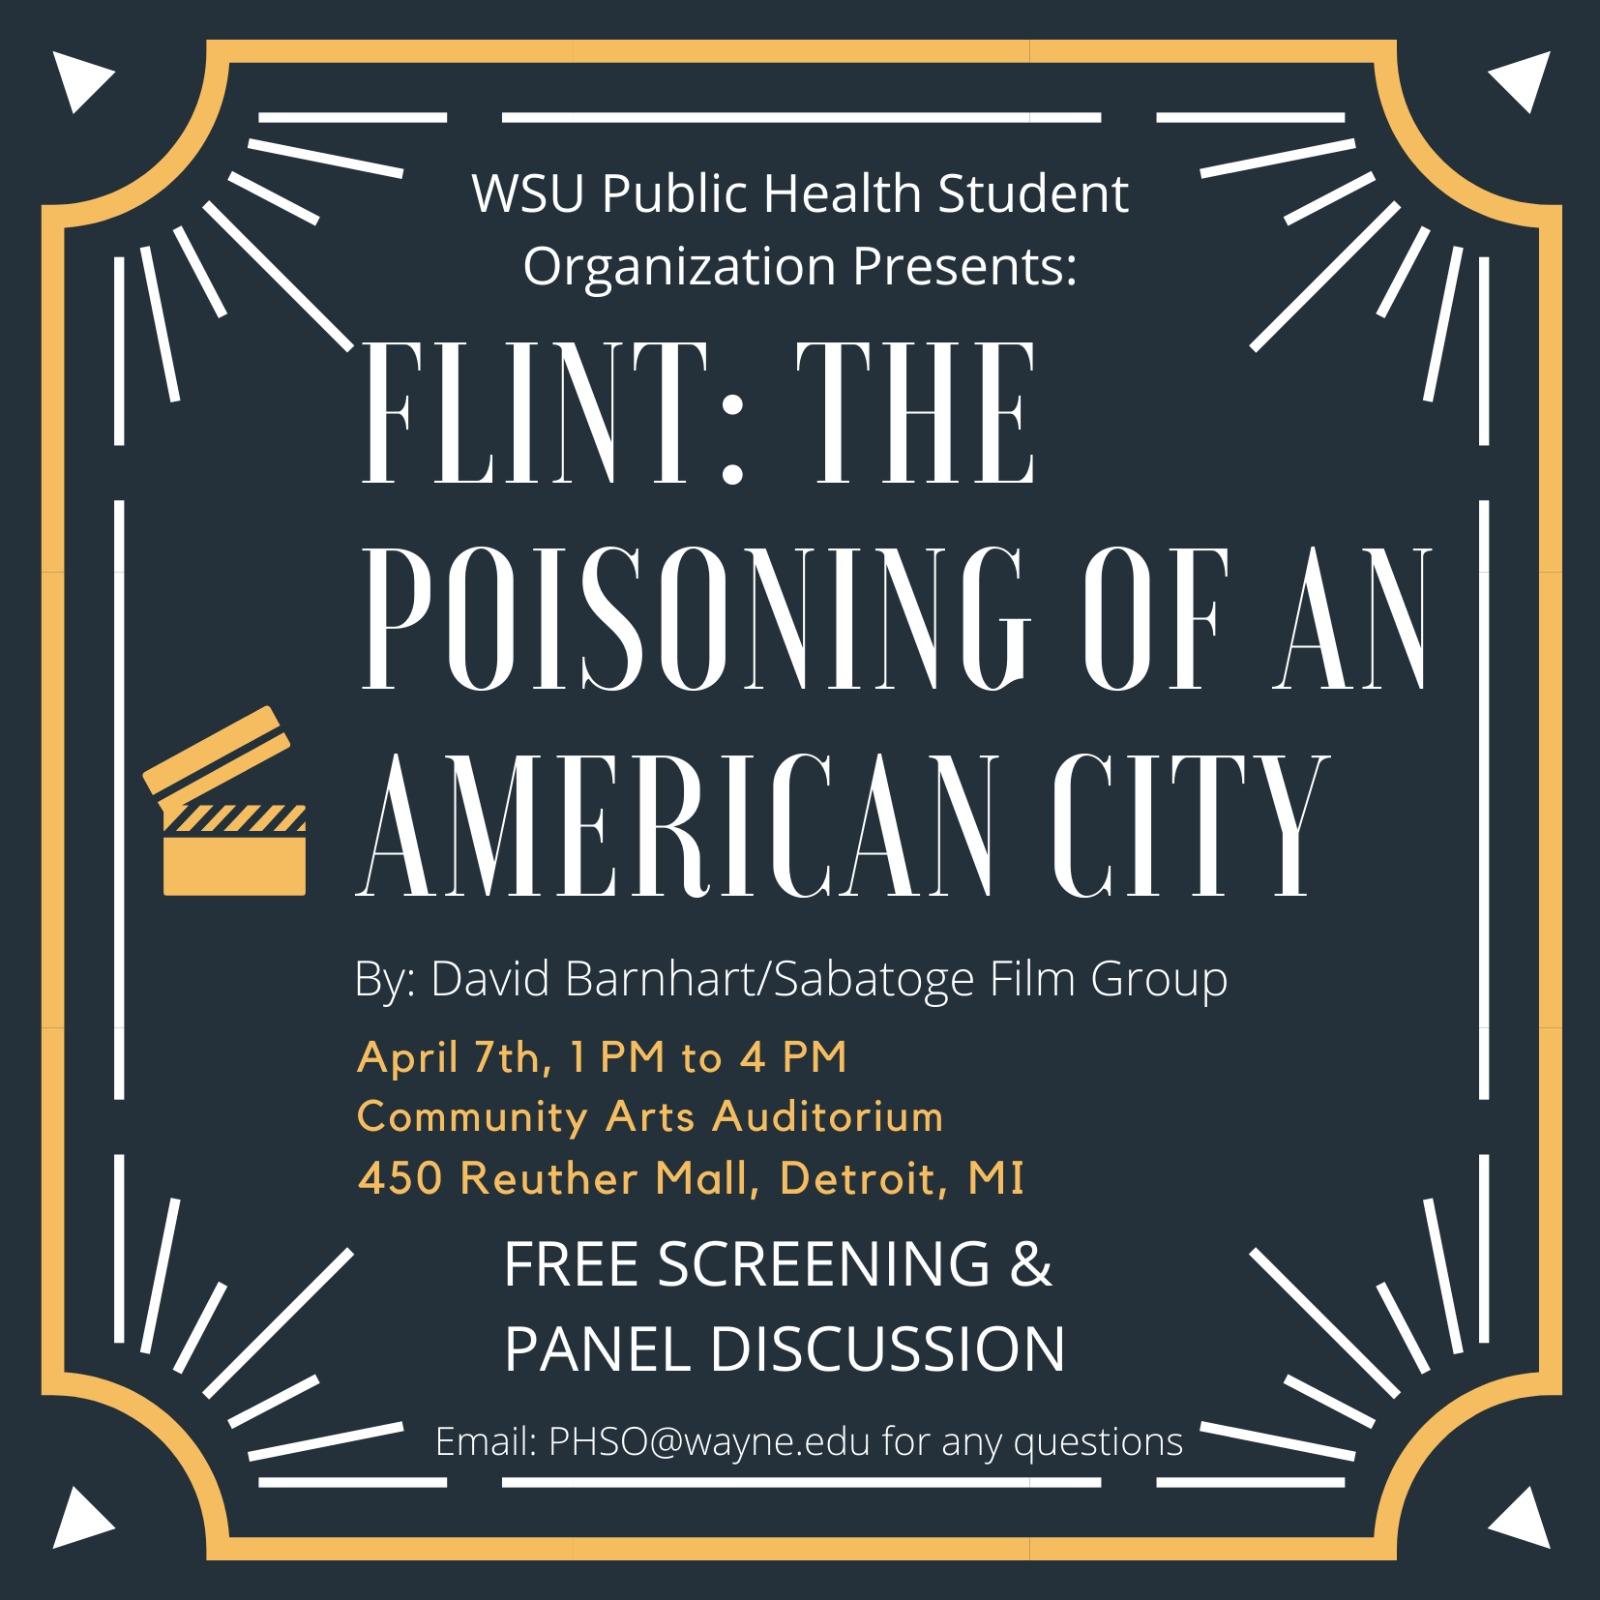 Flint: The Poisoning of an American City Screening and Panel Discussion